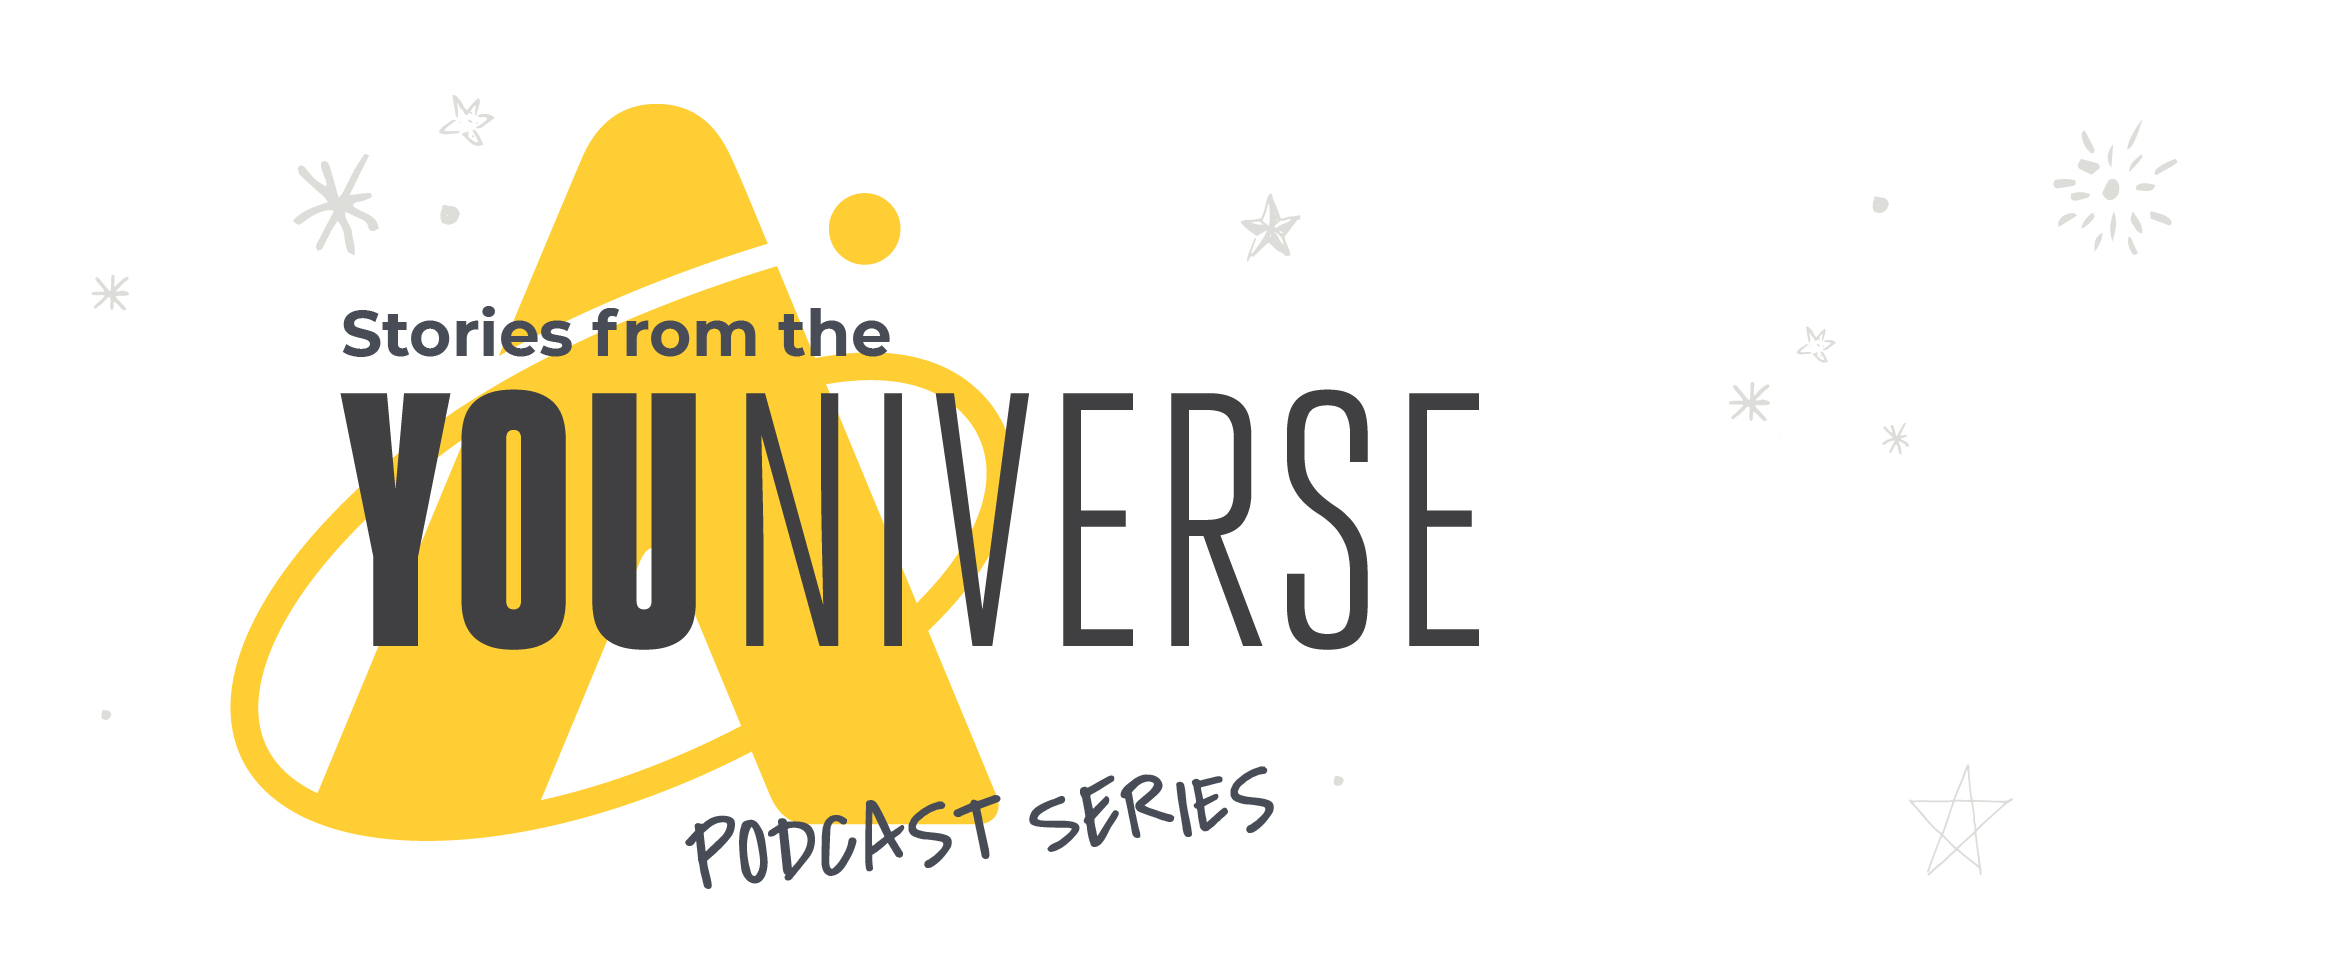 Stories From the YOUniverse podcast - New from the Adler!